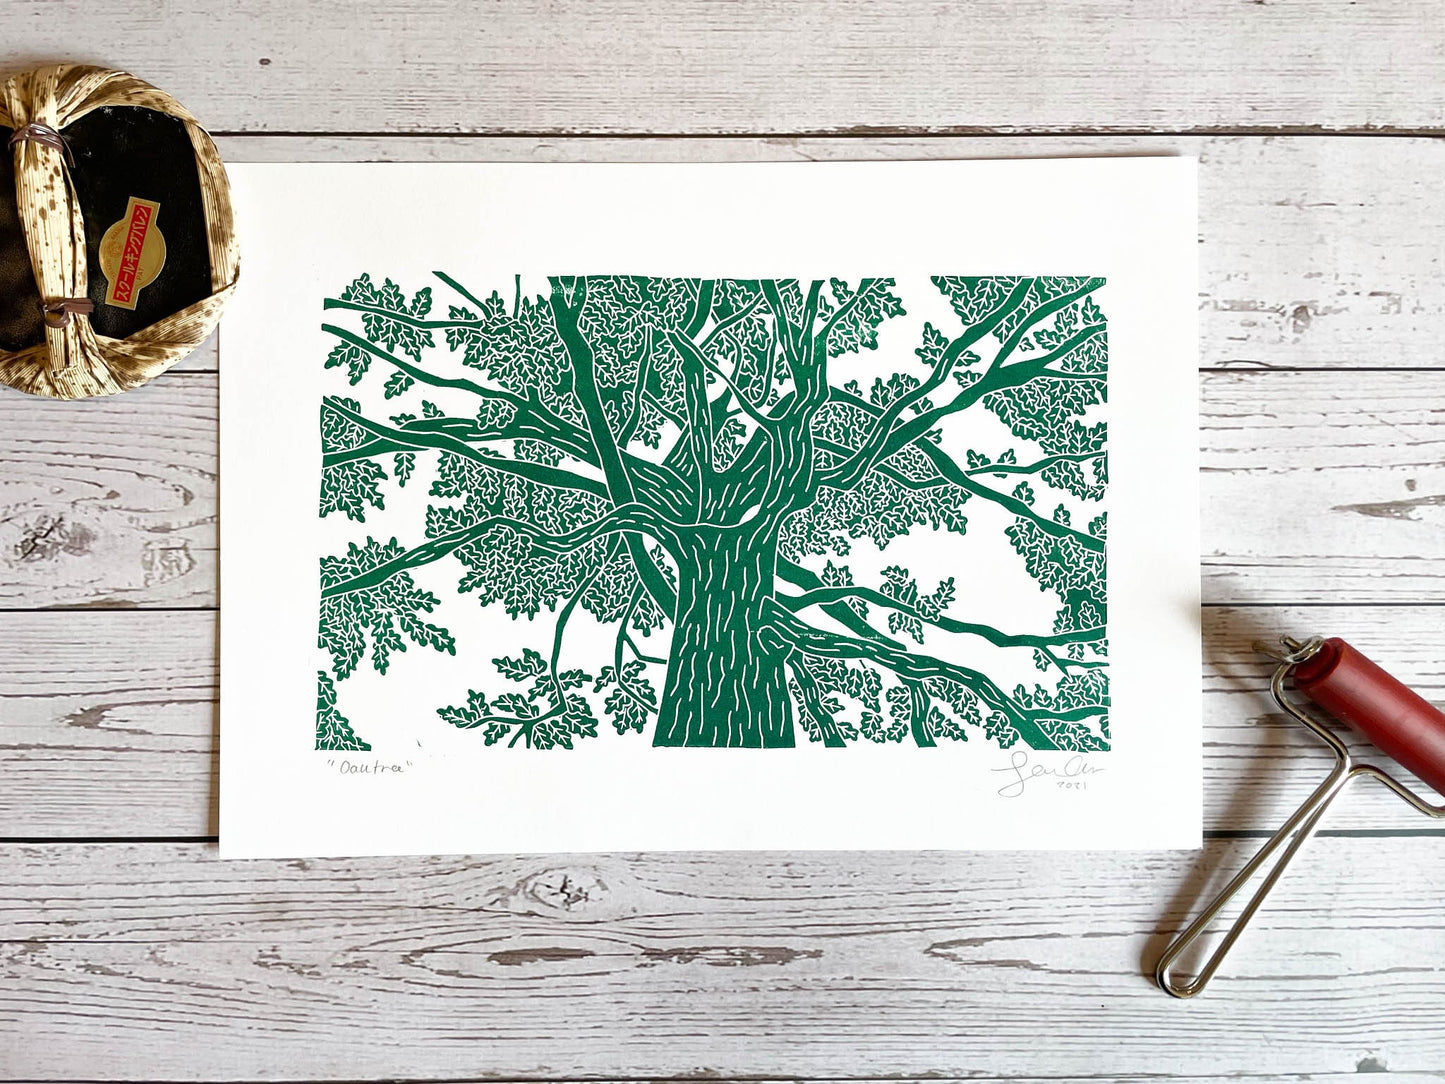 A lino print of an oak tree as viewed from standing under it and looking up in green